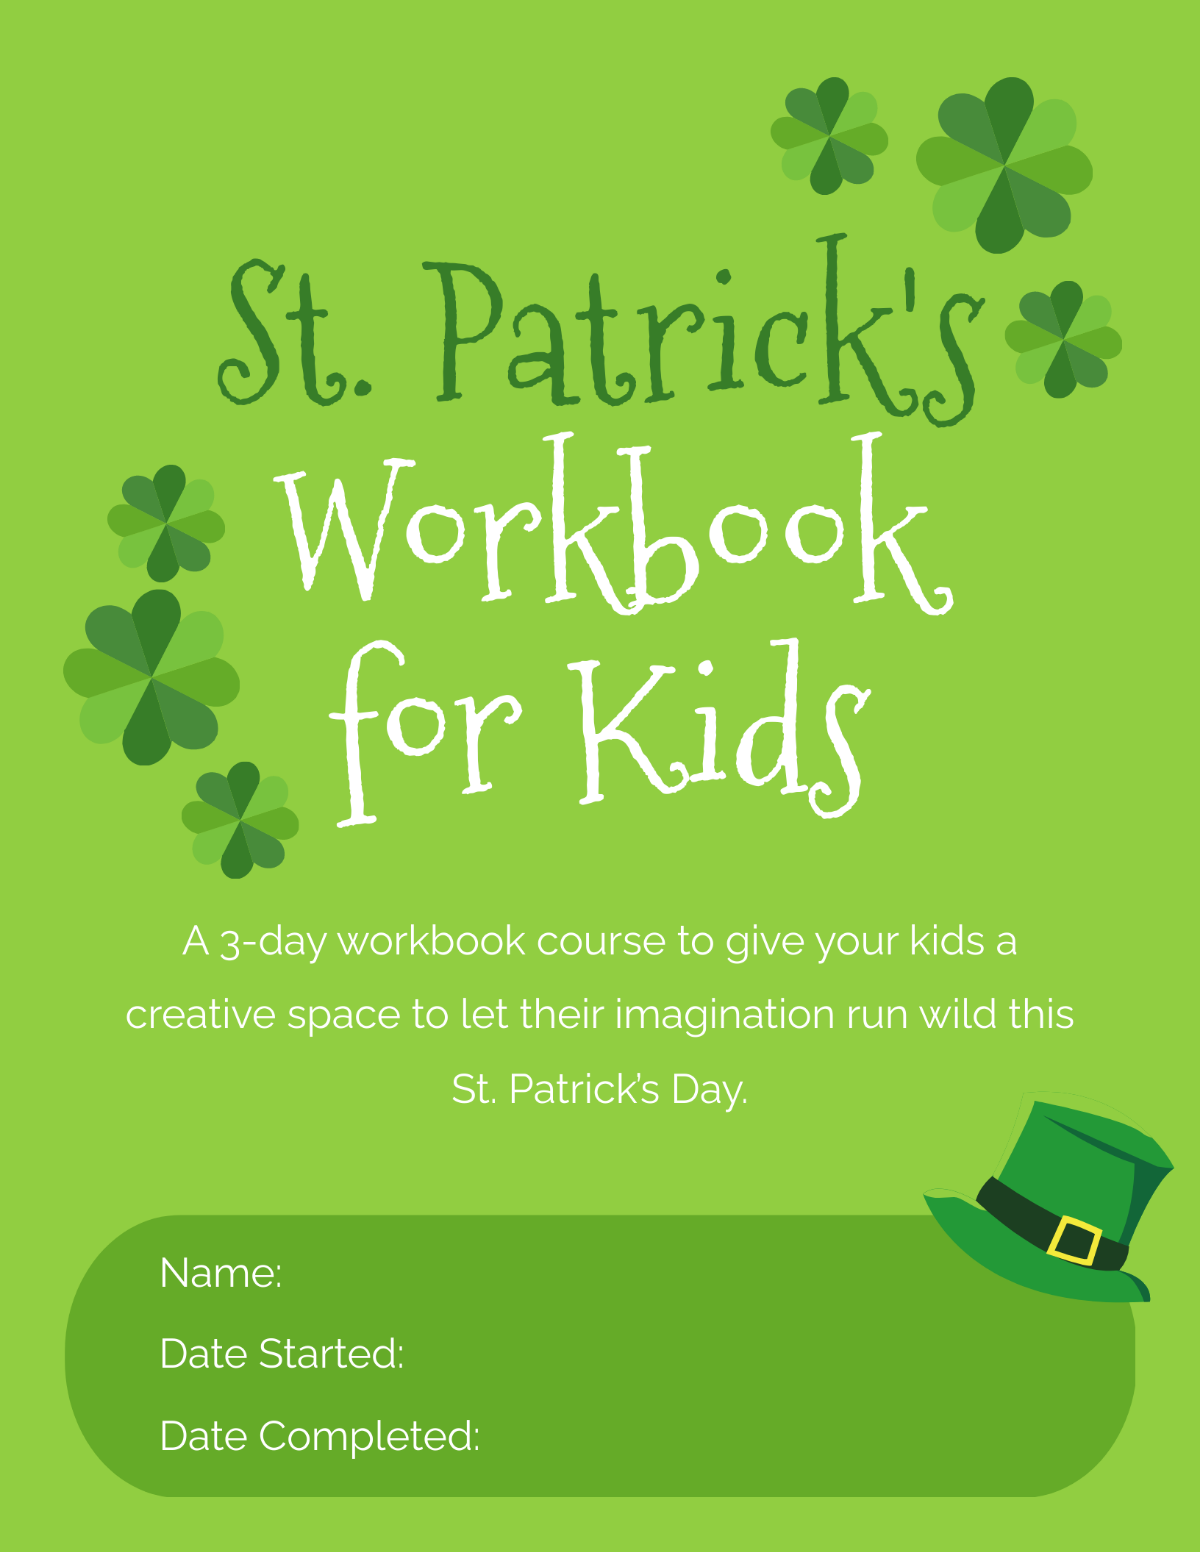 St. Patrick's Day Workbook For Kids Template